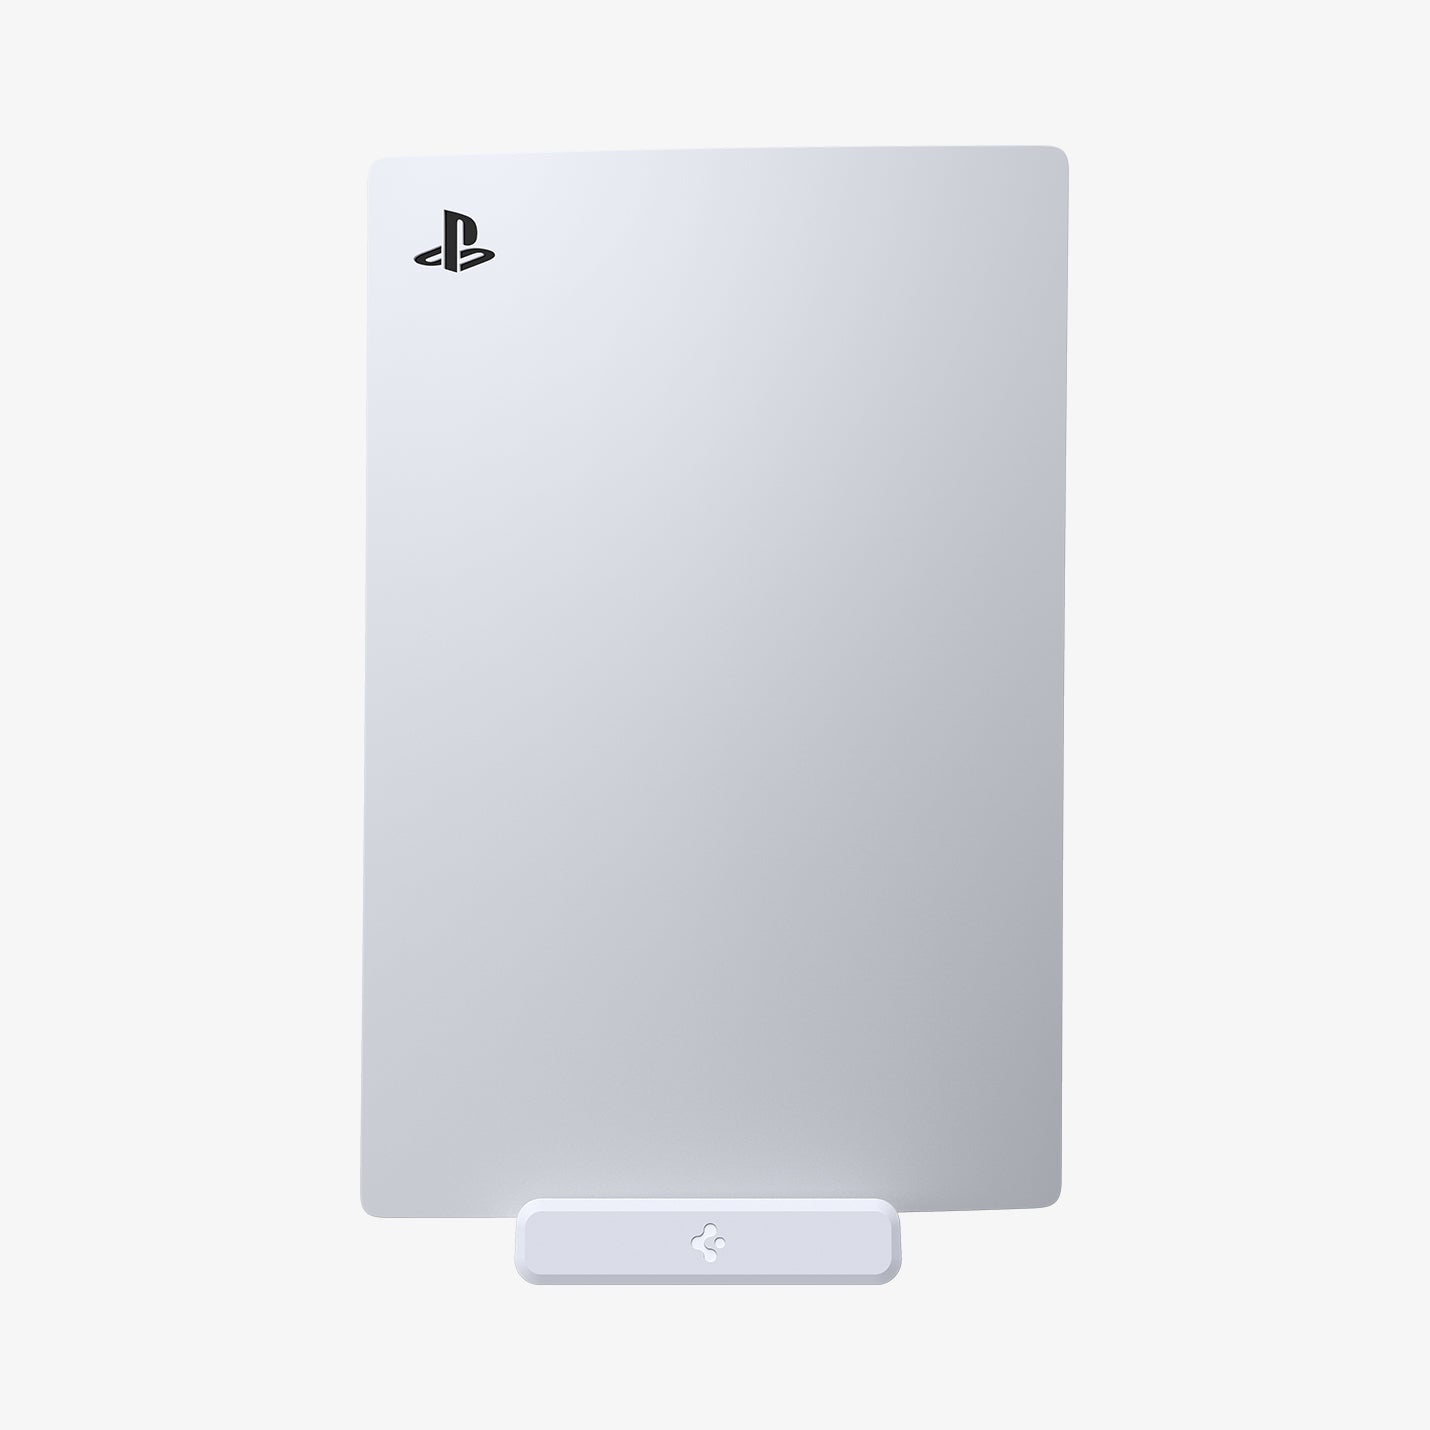 AMP06396 - Playstation 5 Console Mount | VG200 in white showing the front with PS5 attached